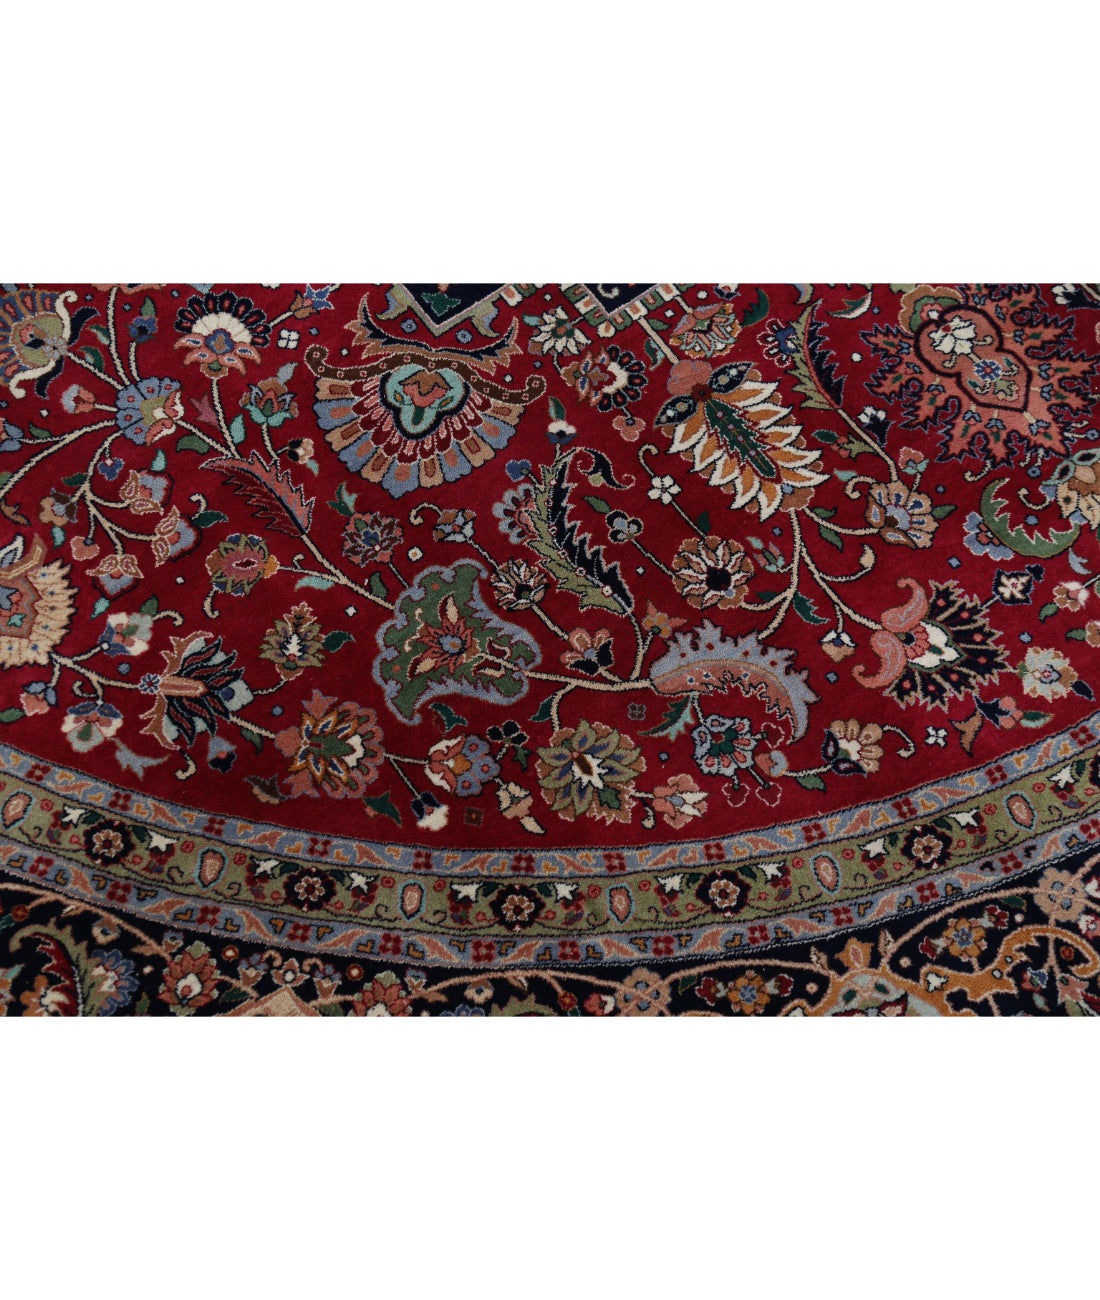 Hand Knotted Heritage Fine Persian Style Wool Rug - 8'0'' x 8'3'' 8'0'' x 8'3'' (240 X 248) / Pink / Blue